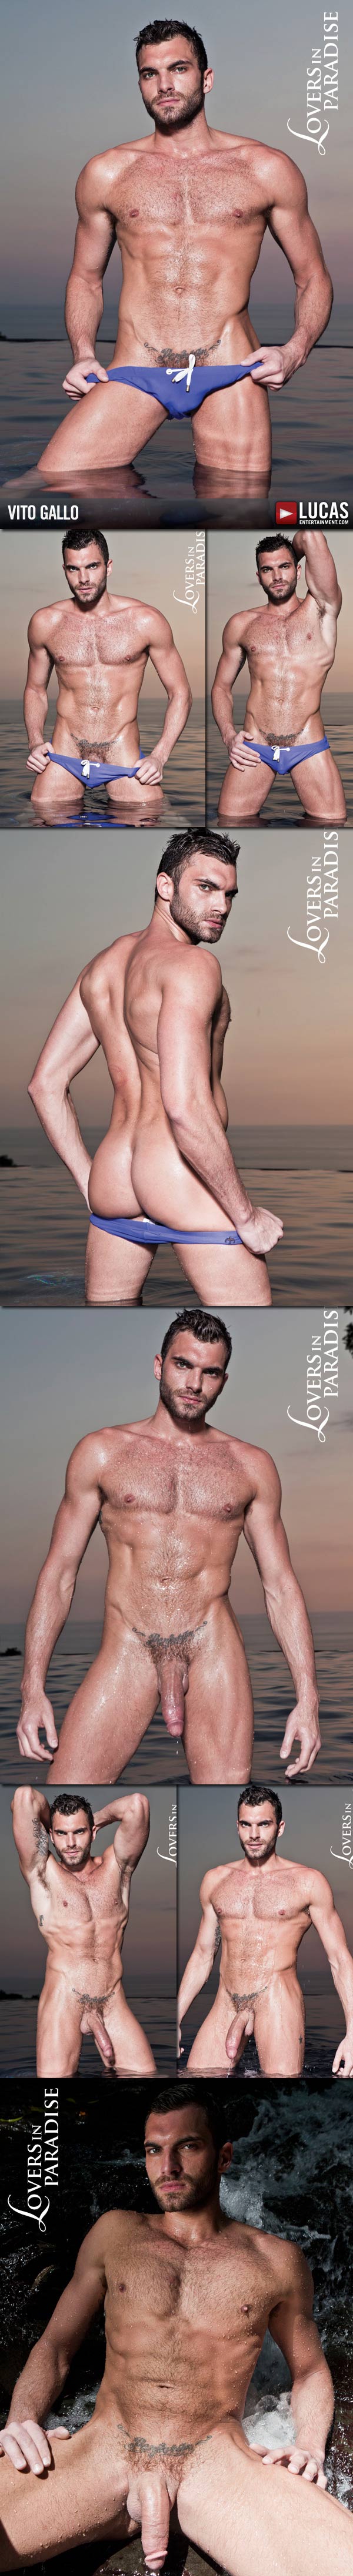 Lovers In Paradise (Vito Gallo & D.O.) at LucasEntertainment.com